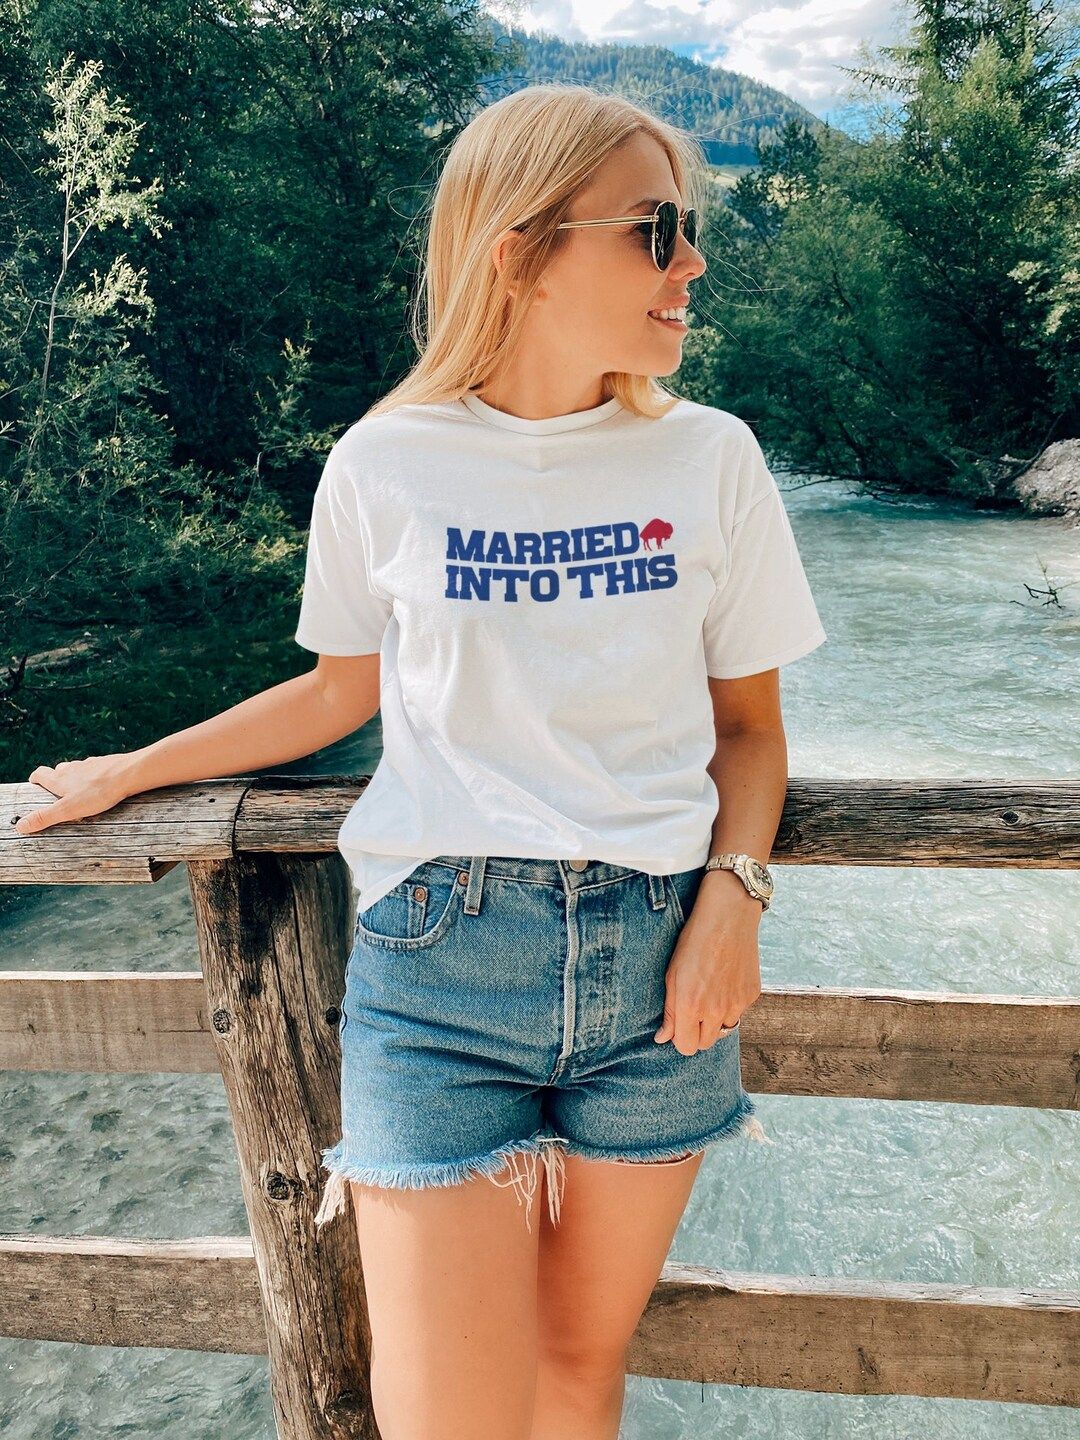 Bills Married Into This Buffalo Football T-Shirt For Tailgates Gameday Sporting Events | Etsy (US)